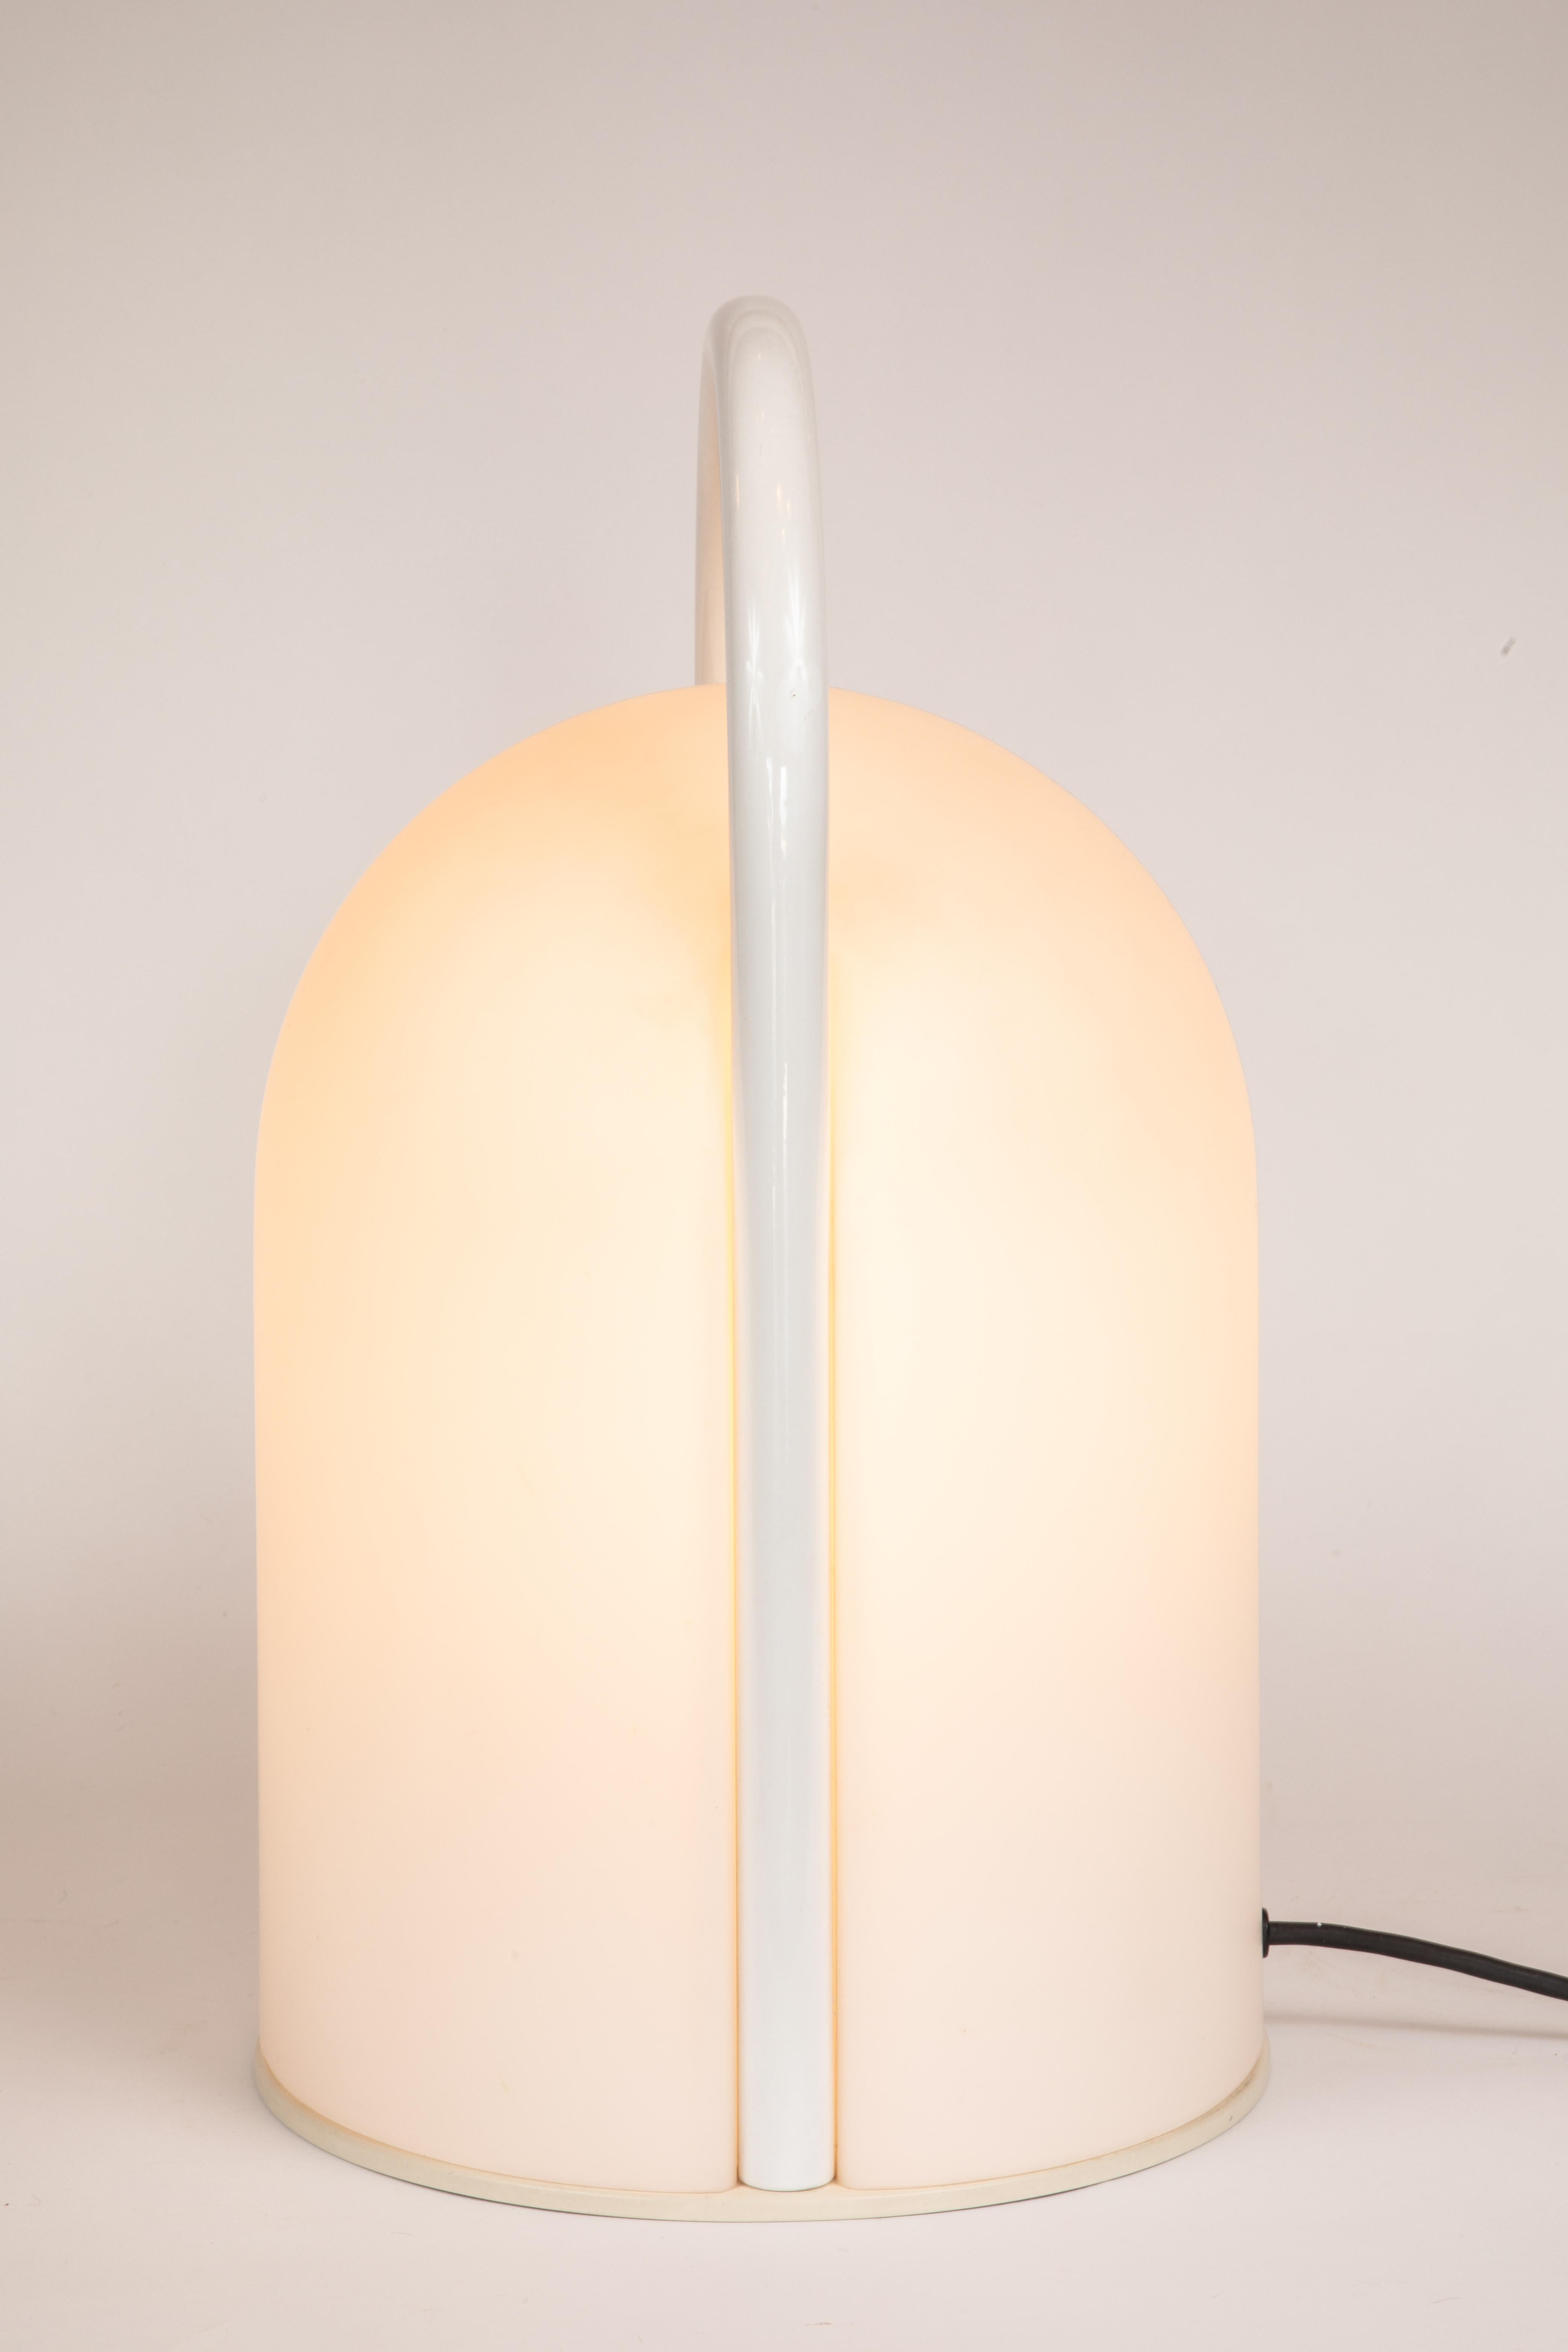 Large Romolo Lanciani 'Tender' Table Lamp for Tronconi For Sale 5